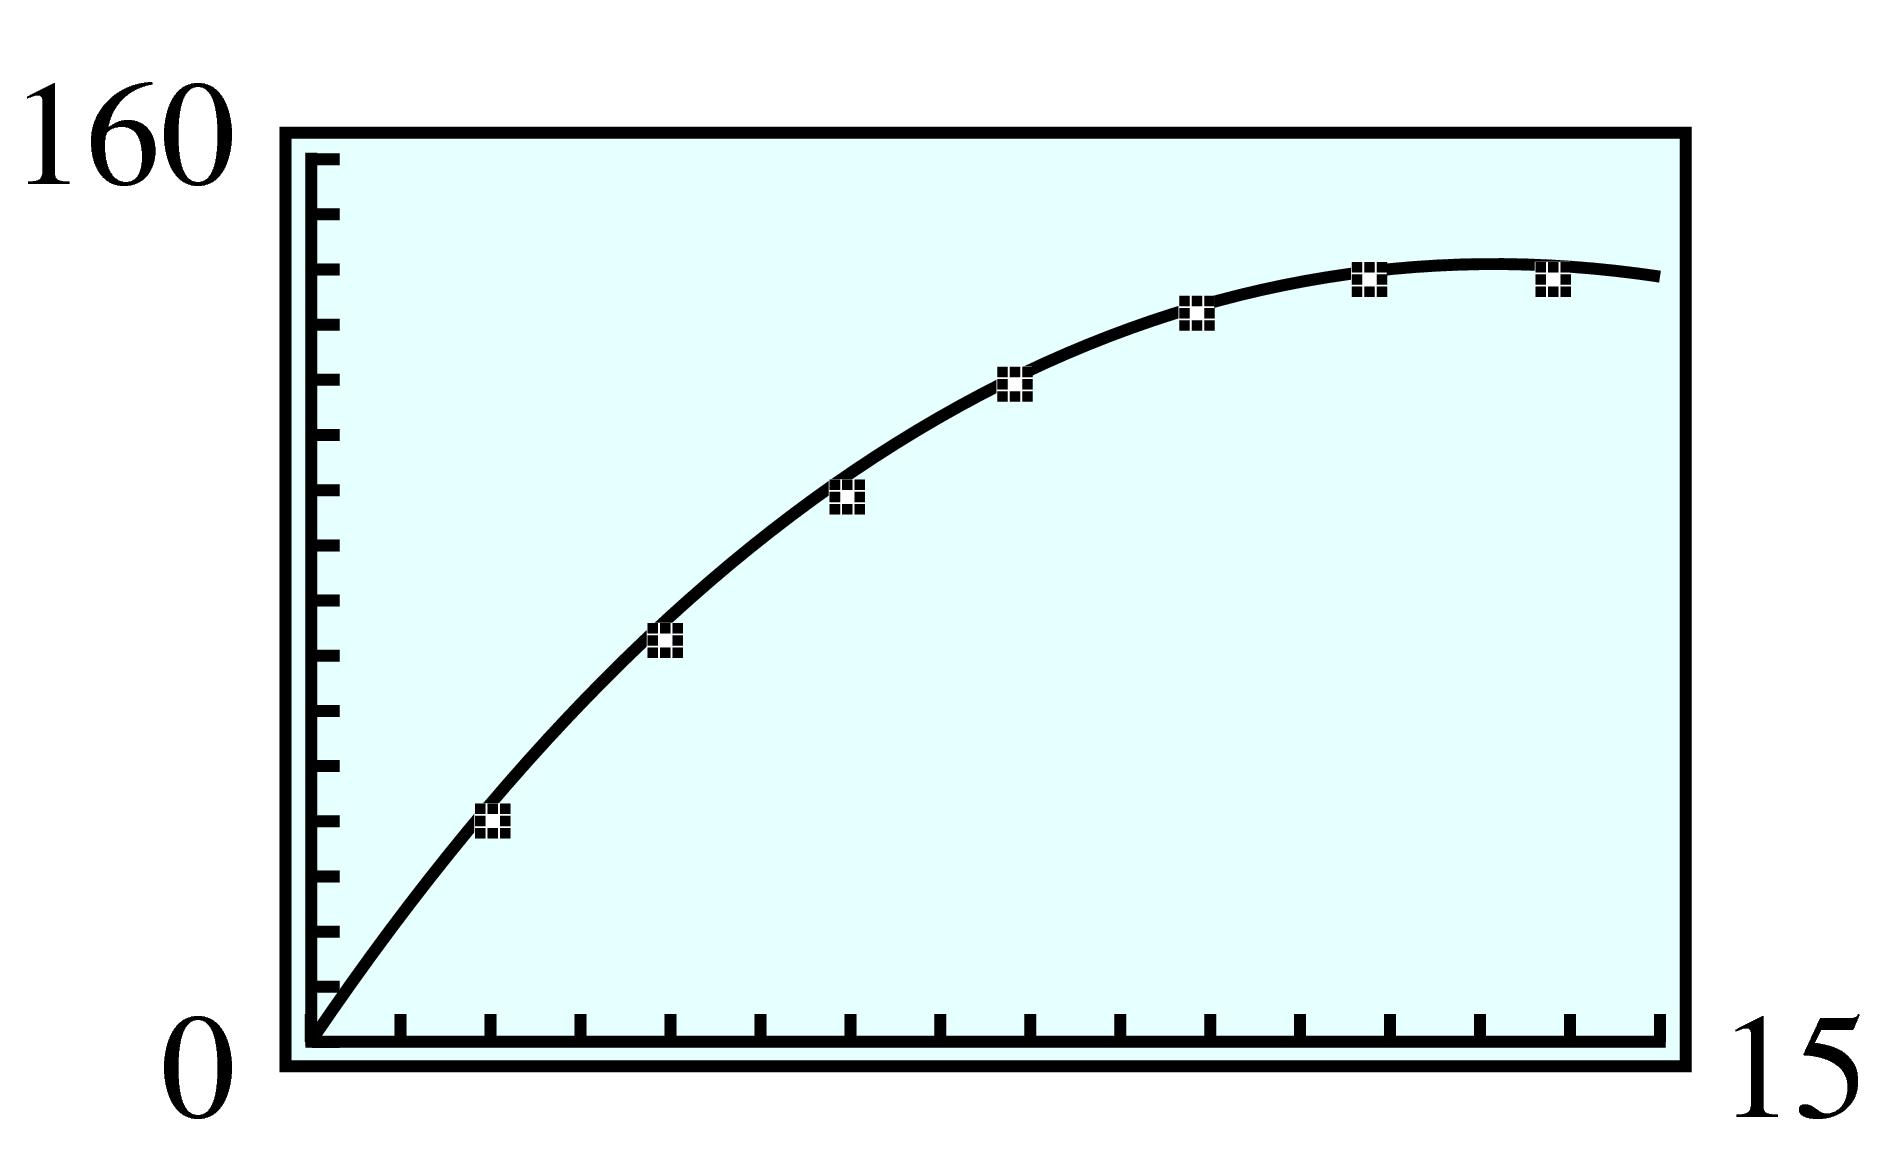 parabola fit to data